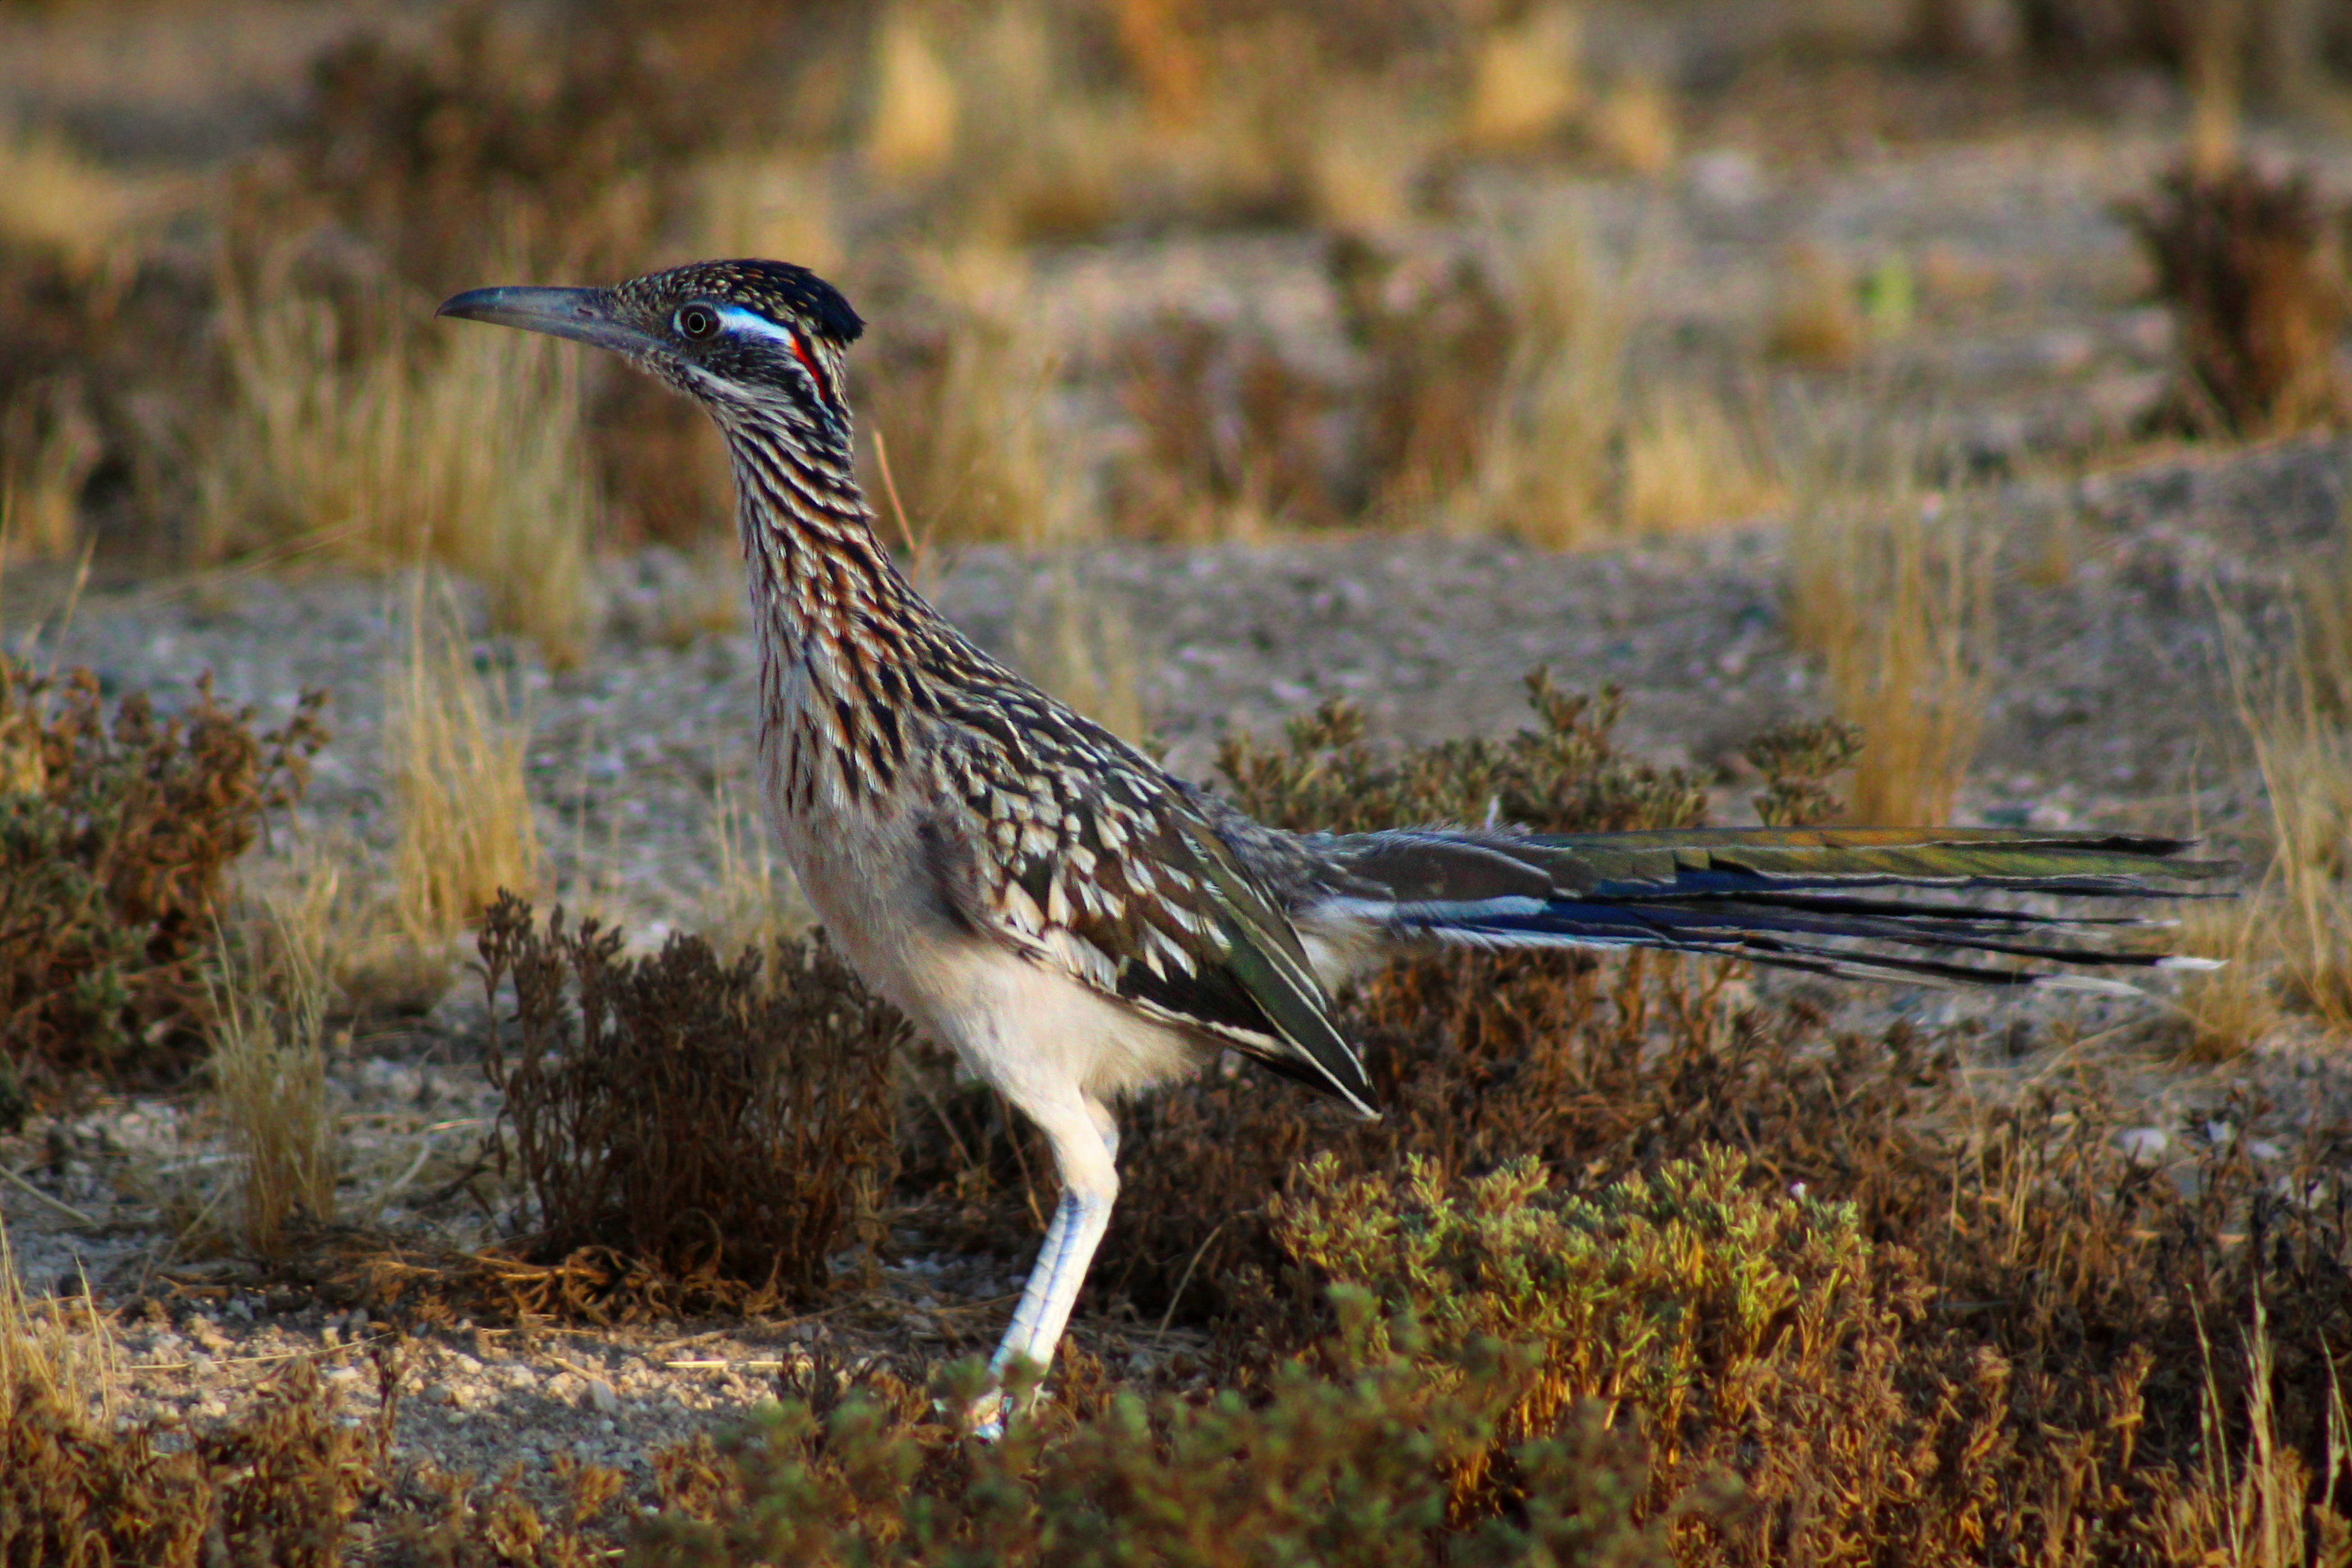 Photo by Jason Judd  |  A Roadrunner looking for dinner on the evening of 6/19/2022 in Catalina S.P.